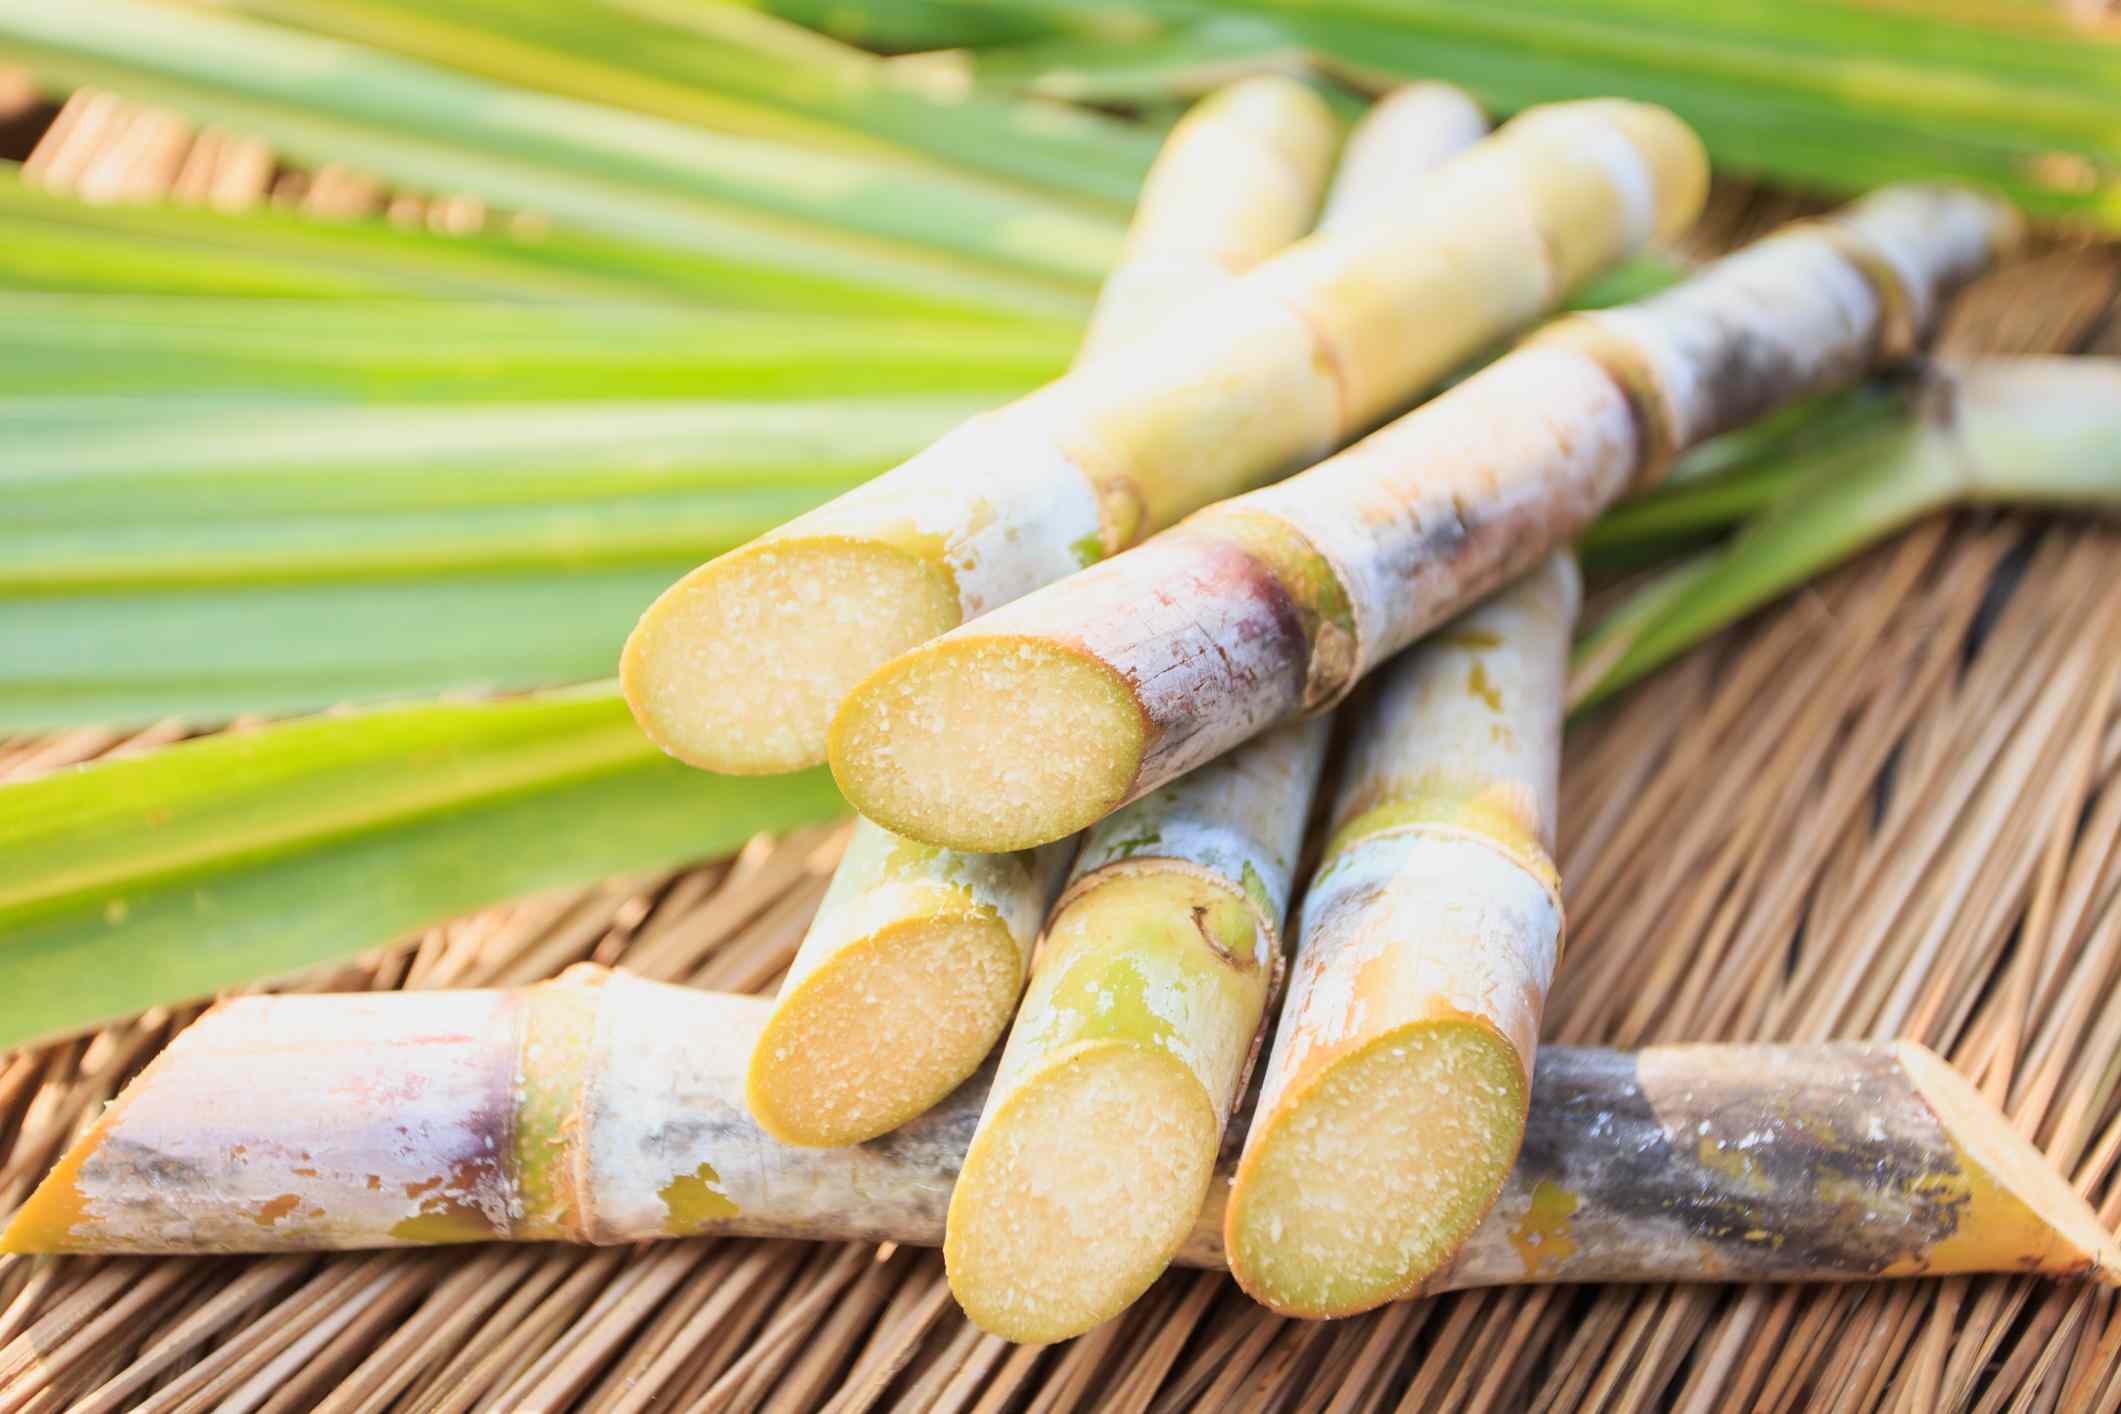 How To Store Sugar Cane